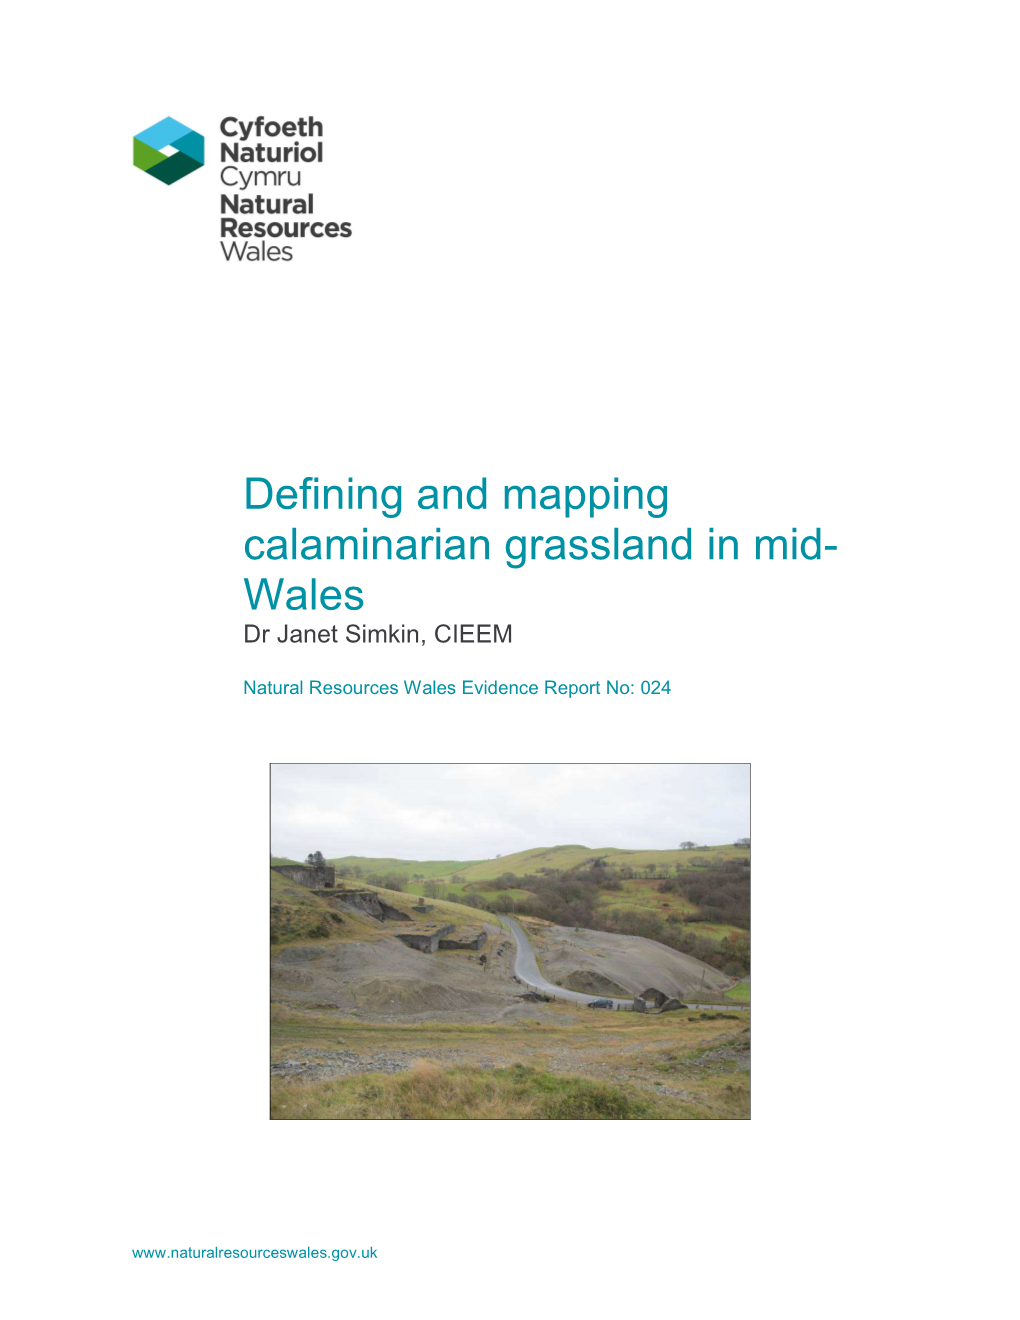 Defining and Mapping Calaminarian Grassland in Mid-Wales